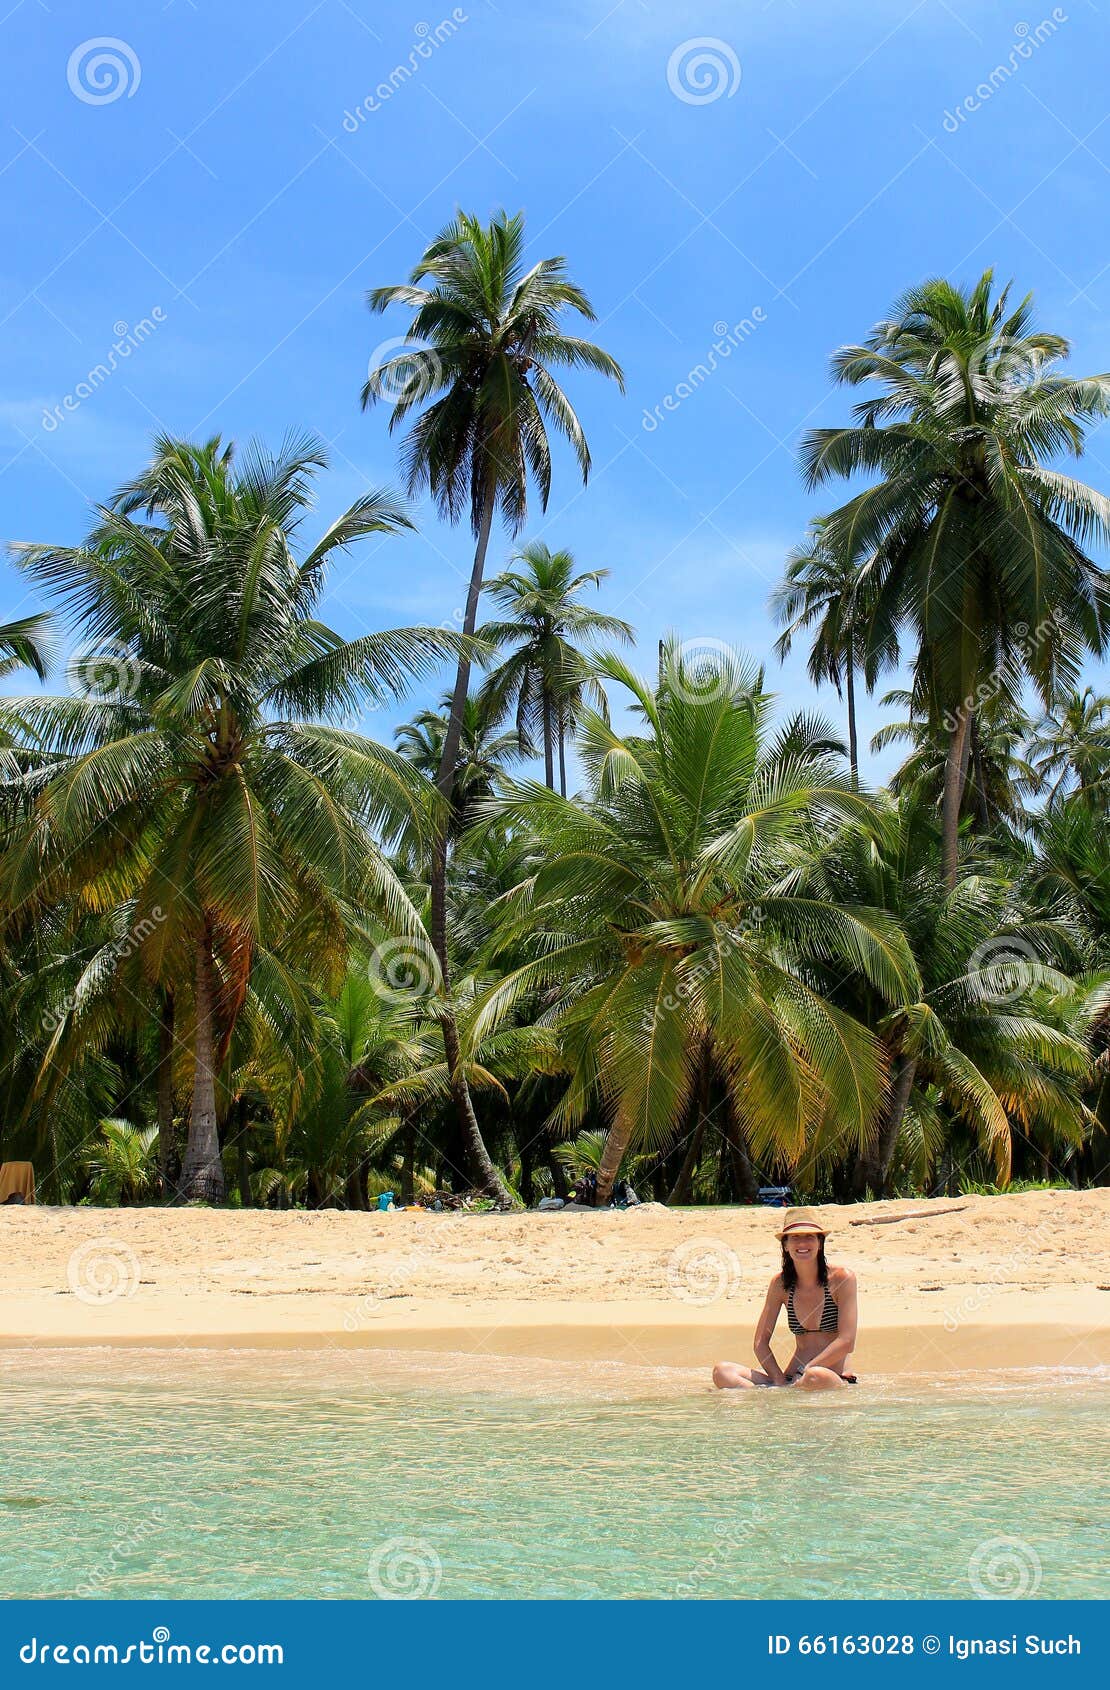 young beautiful woman enjoying her time and resting close to the sea in the southern beach of pelicano island, panama.